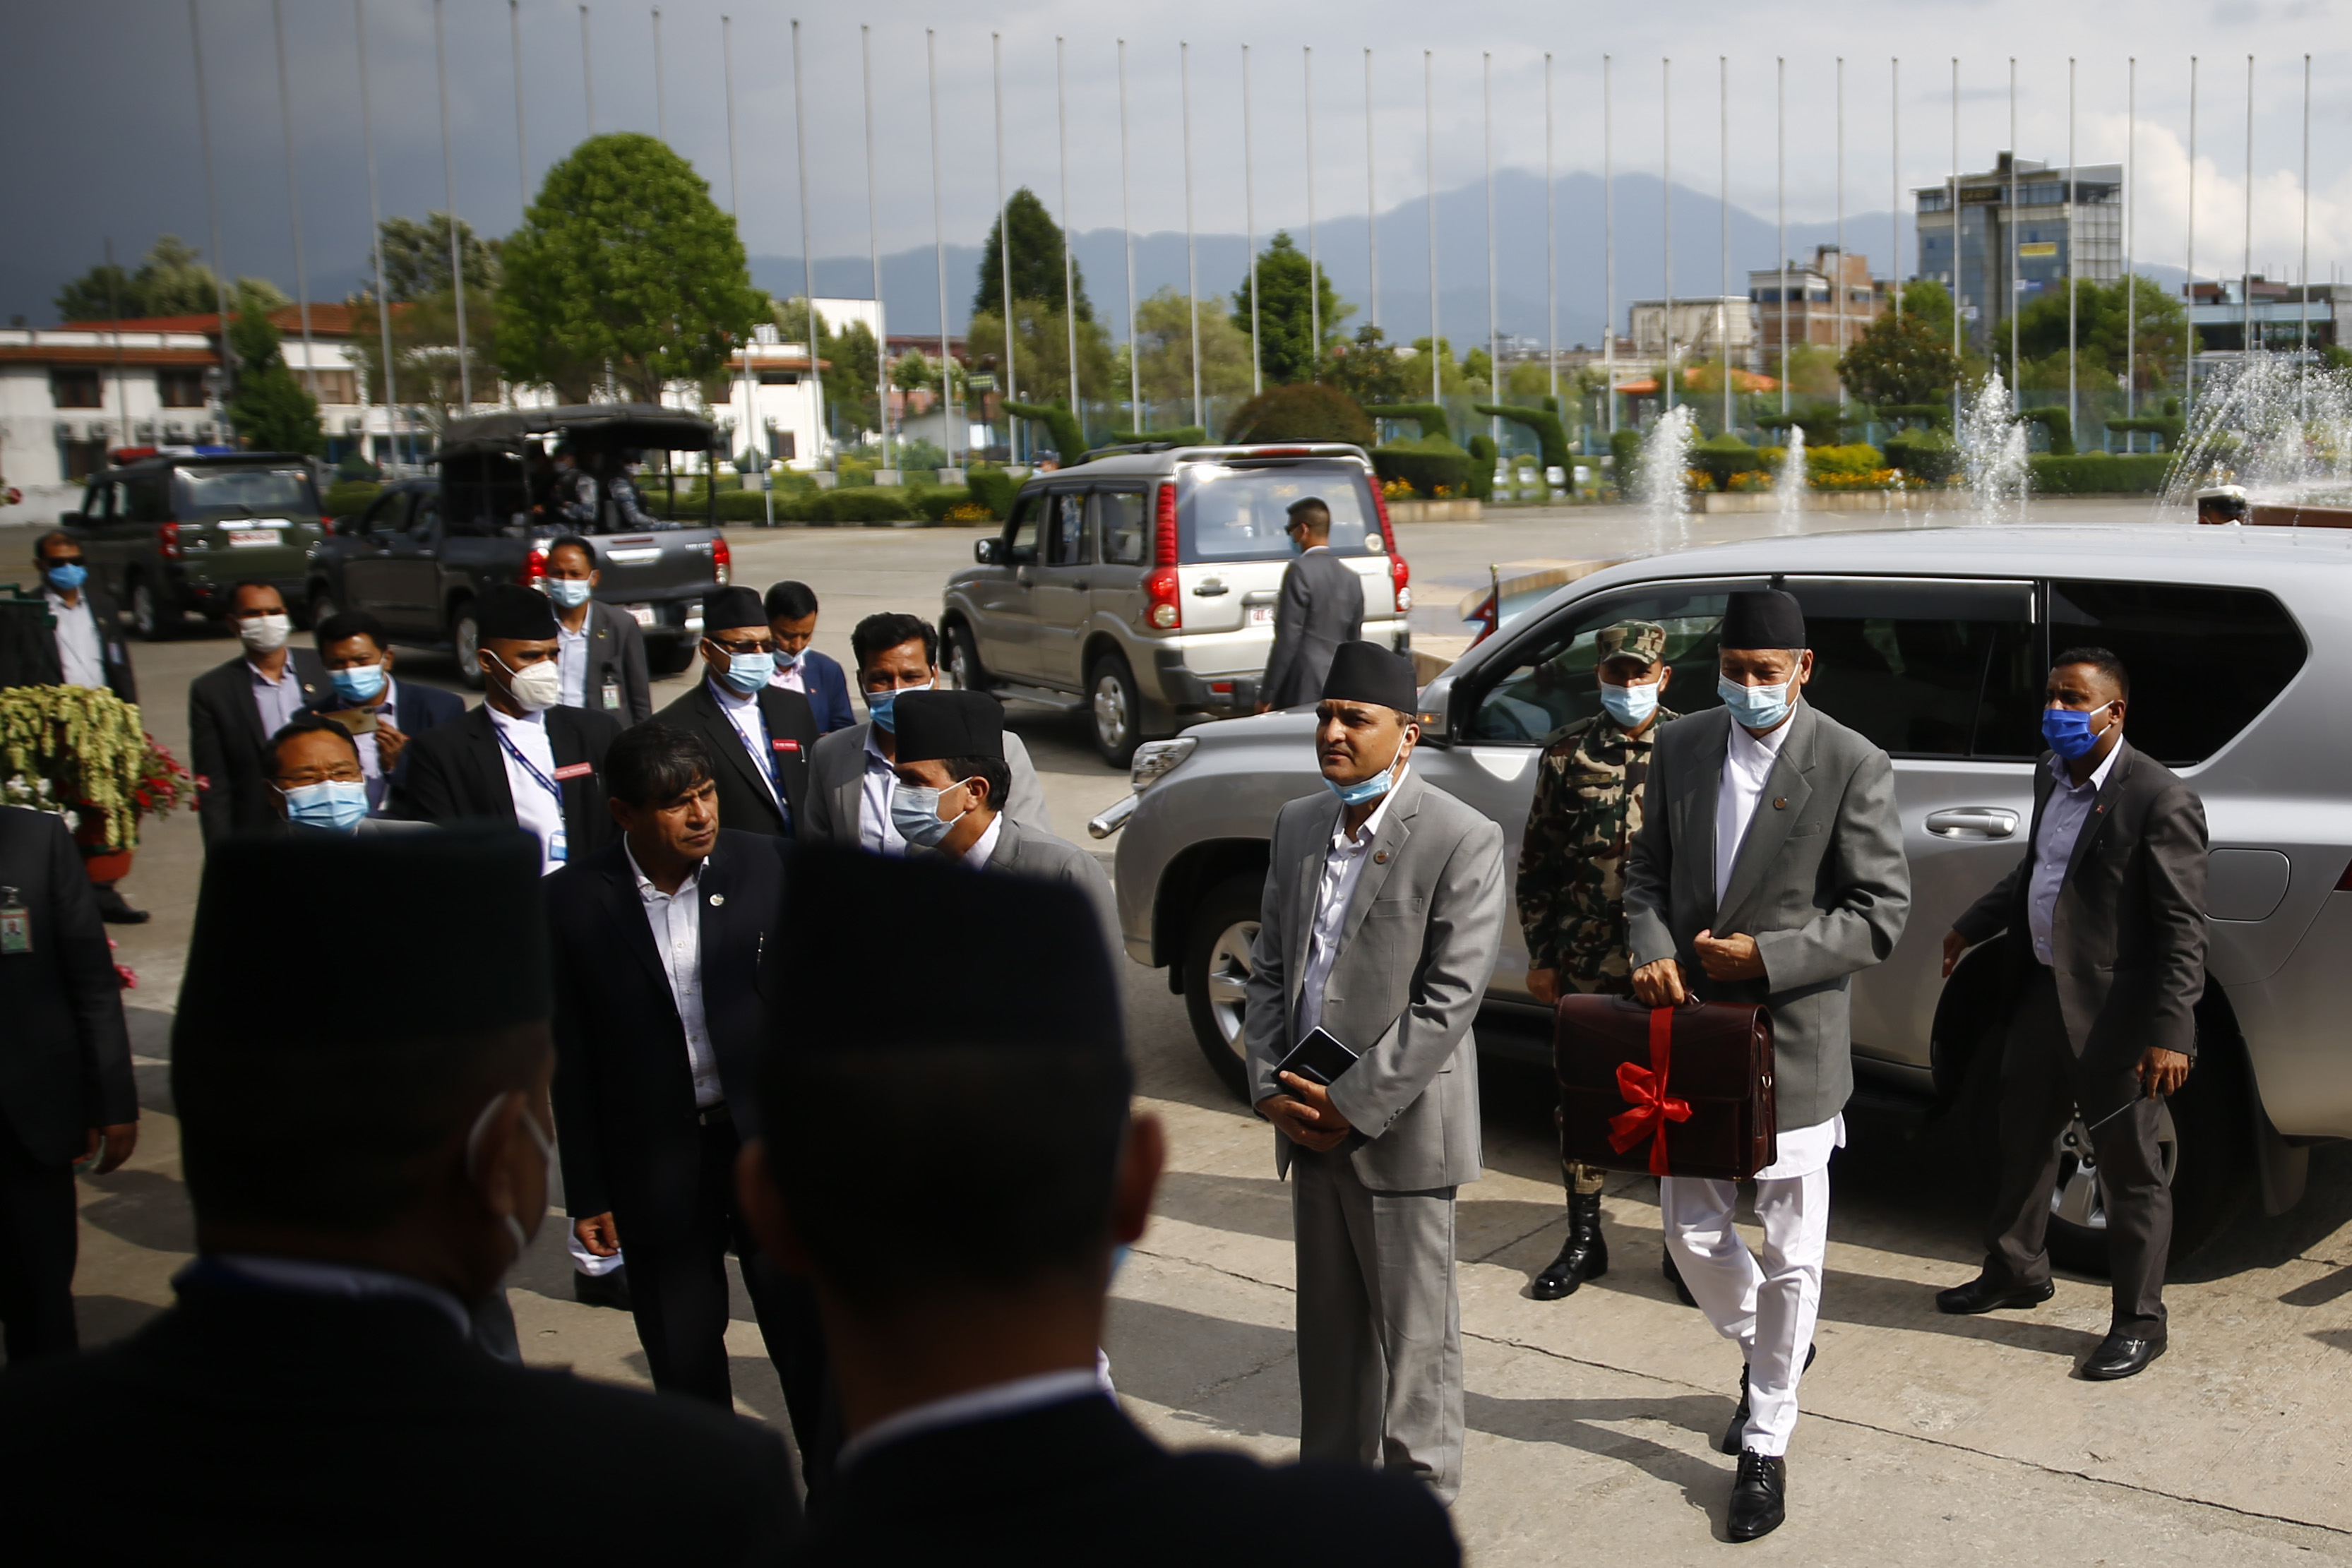 Finance Minister Yubaraj Khatiwada carries a briefcase with the new government's budget for fiscal of 2020-21 at the joint meeting of House of Representatives and the National Assembly at Federal Parliament in Kathmandu, Nepal on Thursday, May 28, 2020.